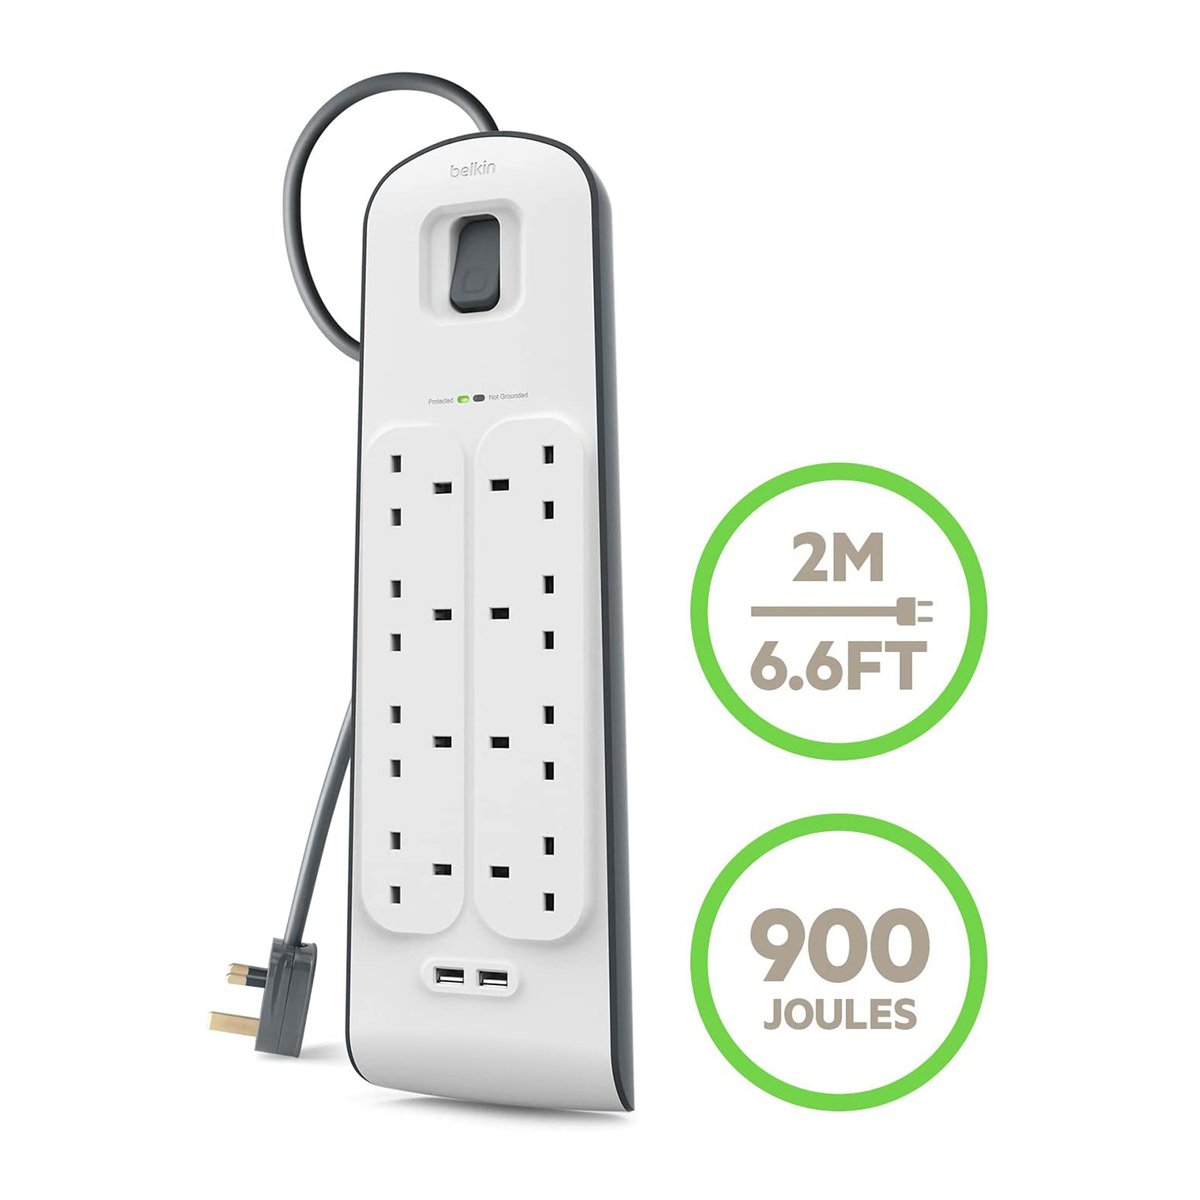 Belkin Surge Protector 8 Out BSV804AR2M